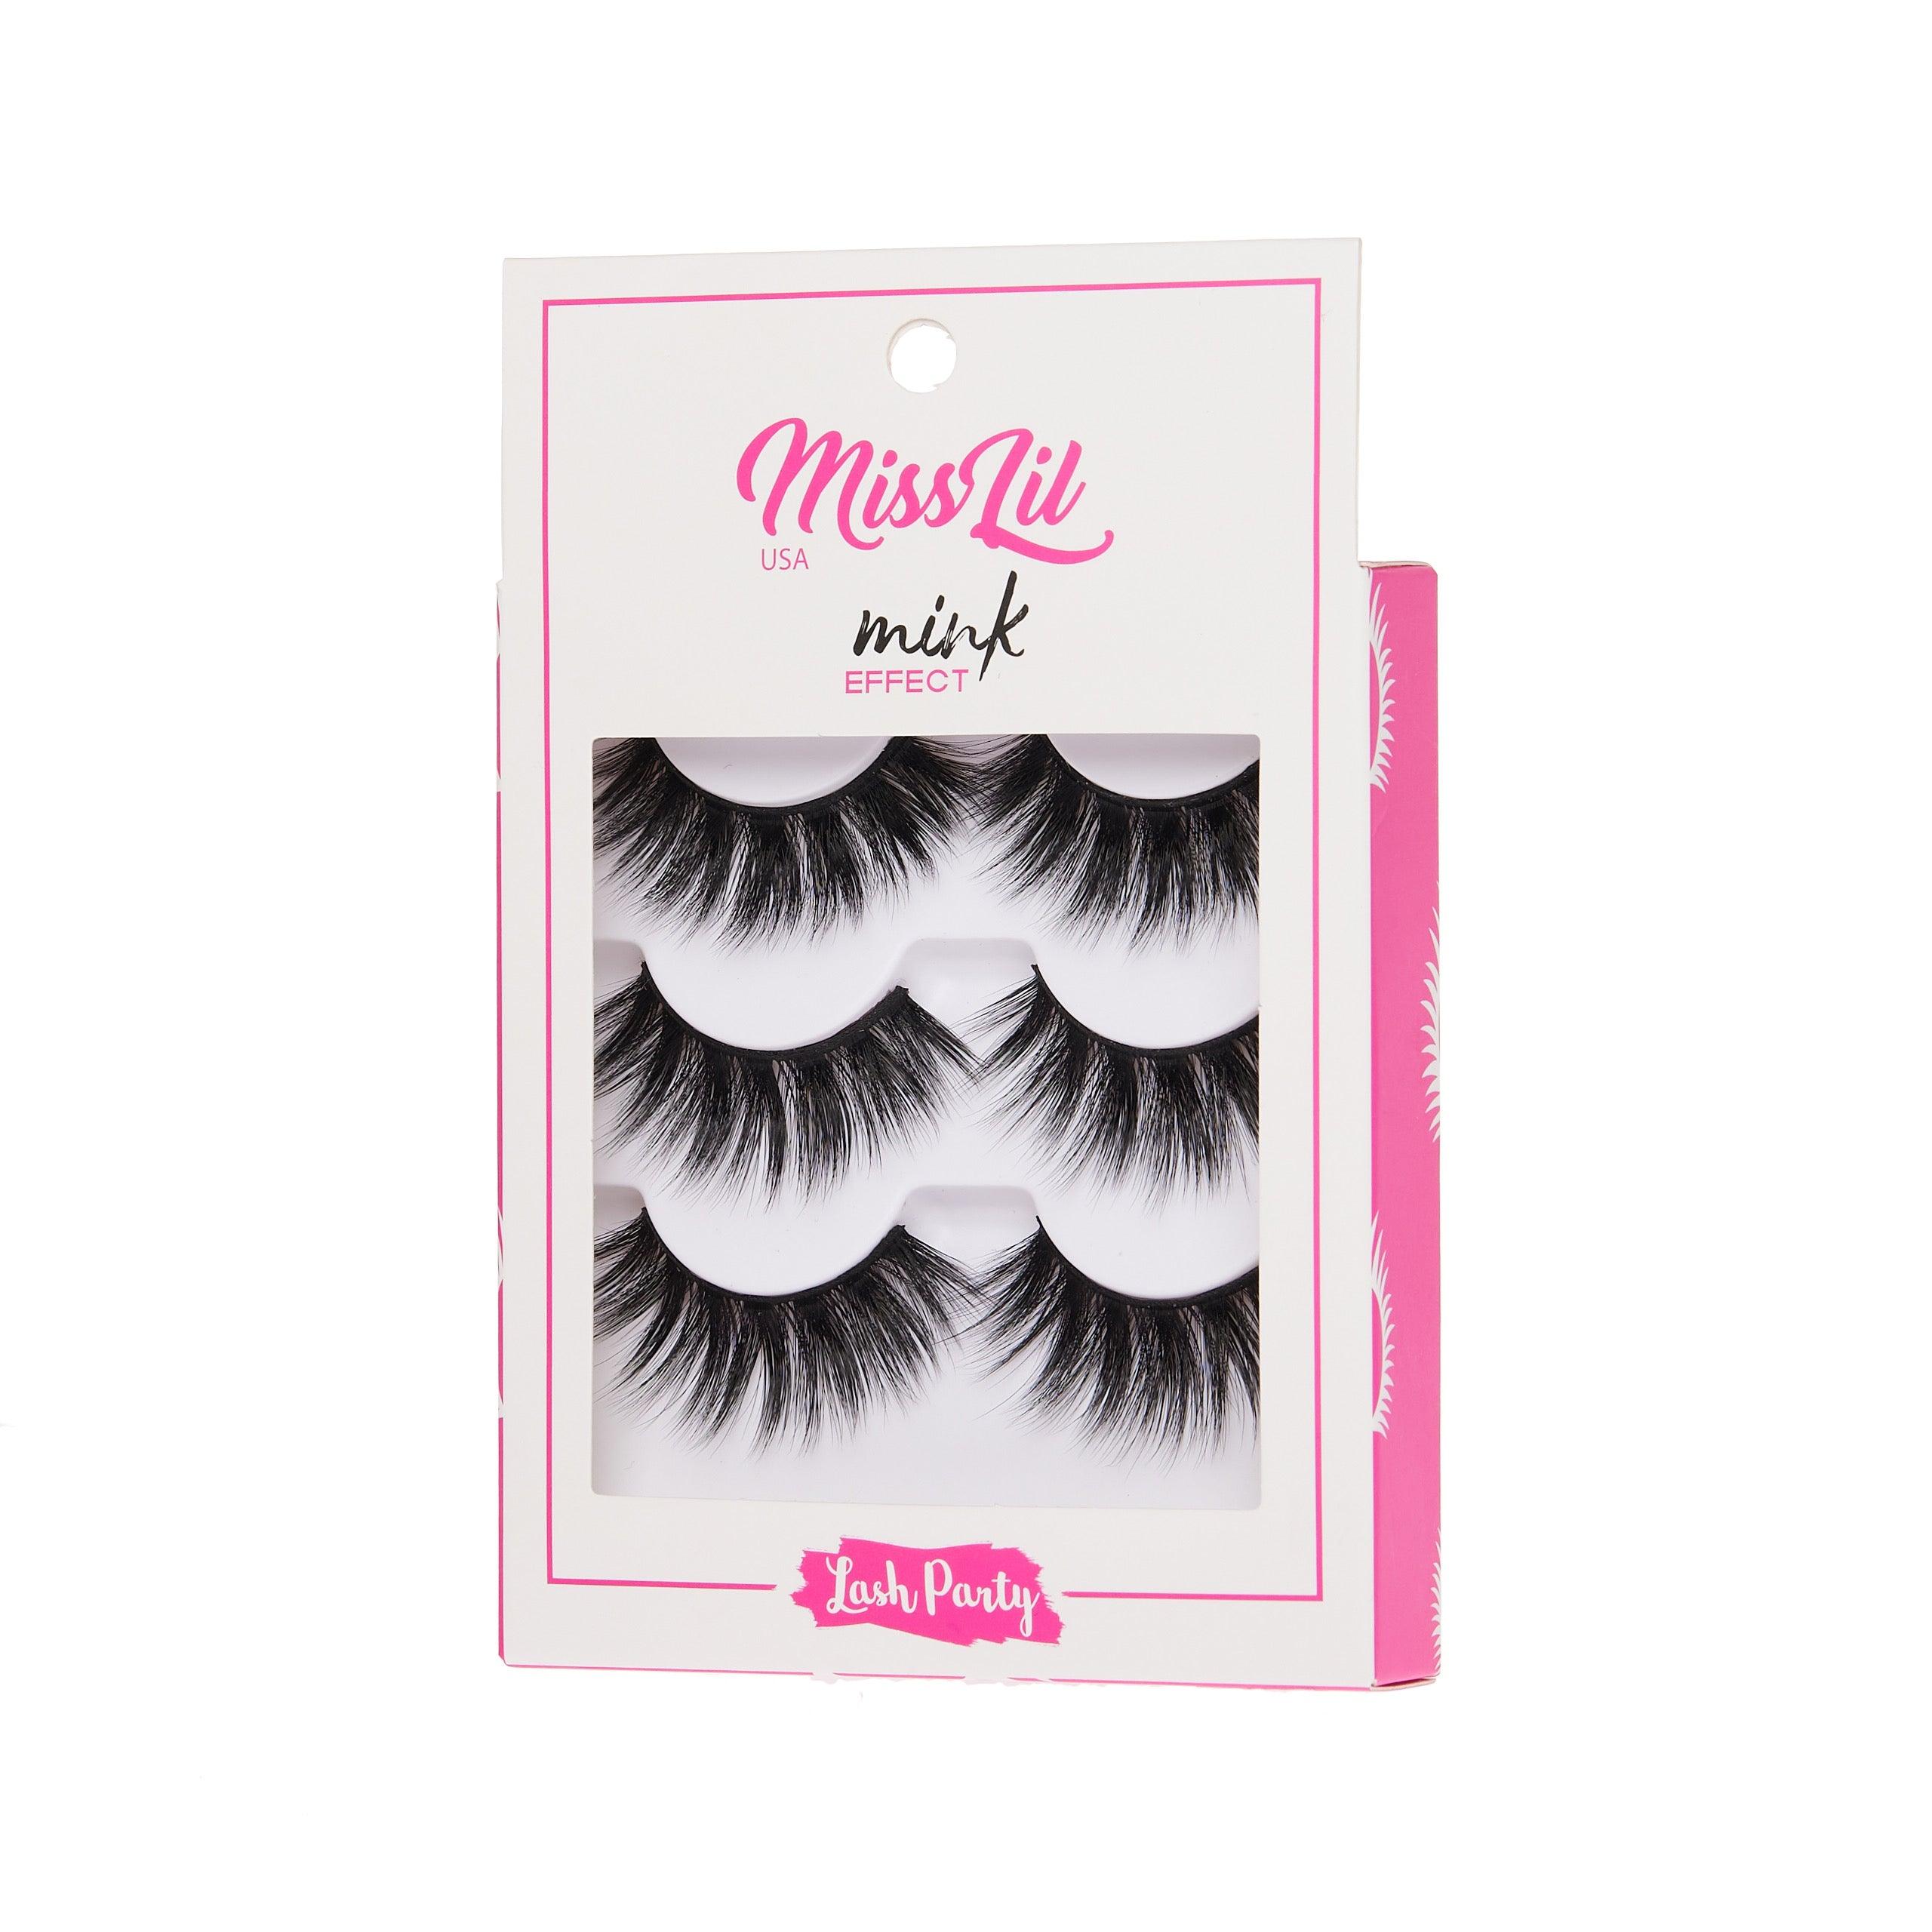 3-Pair Faux Mink Effect Eyelashes - Lash Party Collection #16 - Pack of 3 - Miss Lil USA